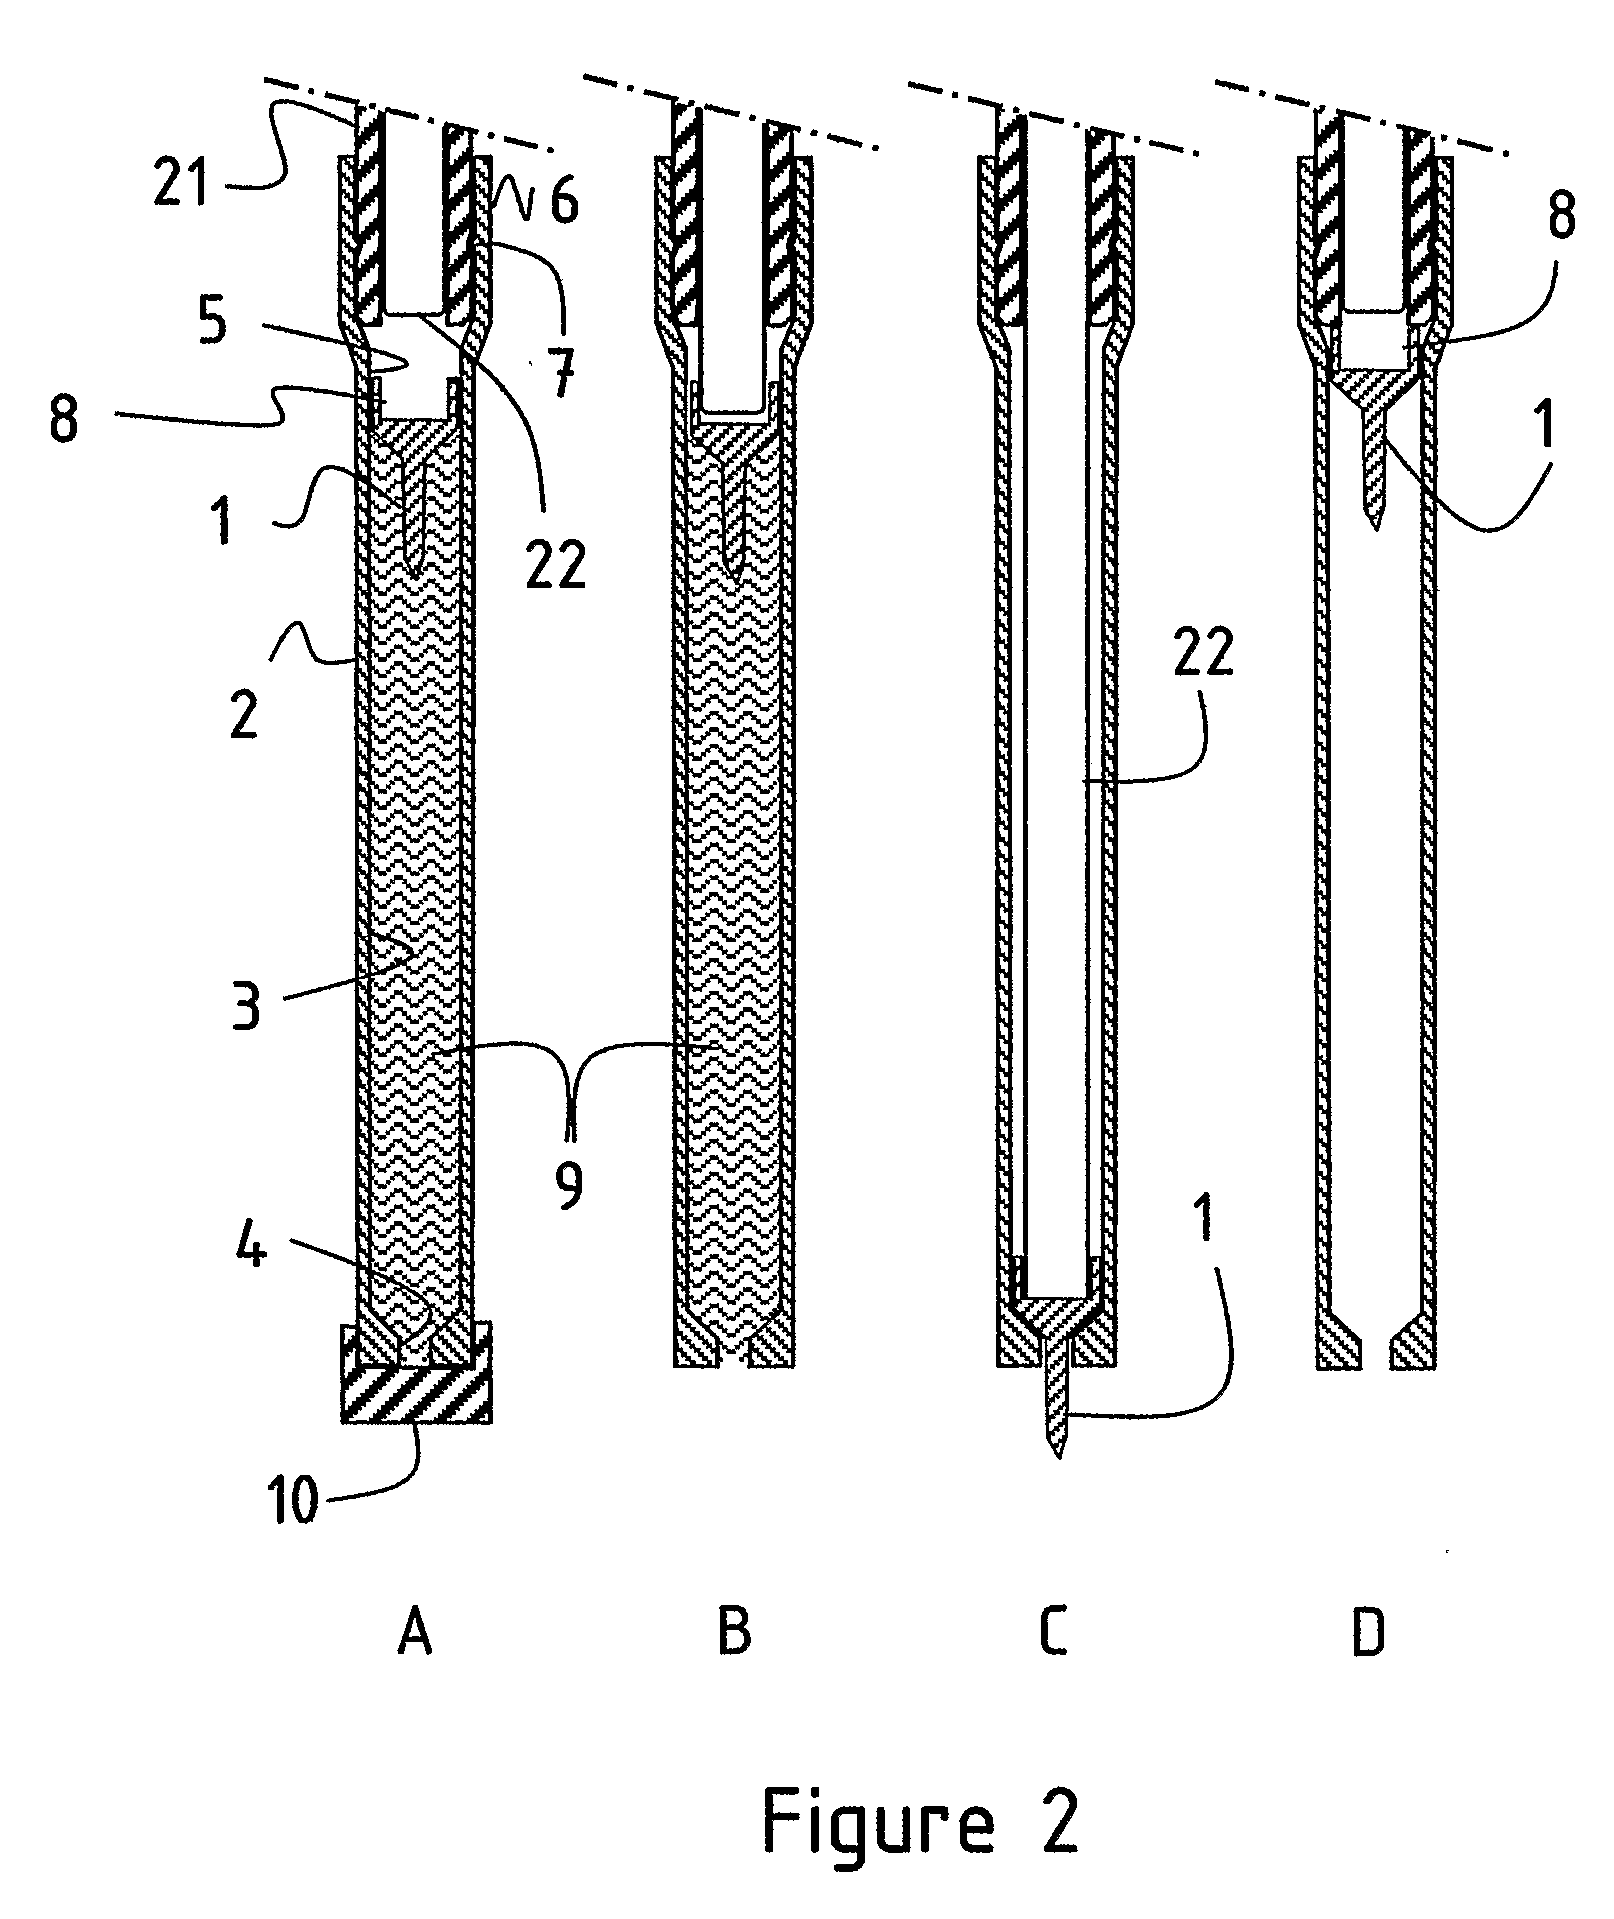 Method and apparatus for piercing the skin and delivery or collection of liquids